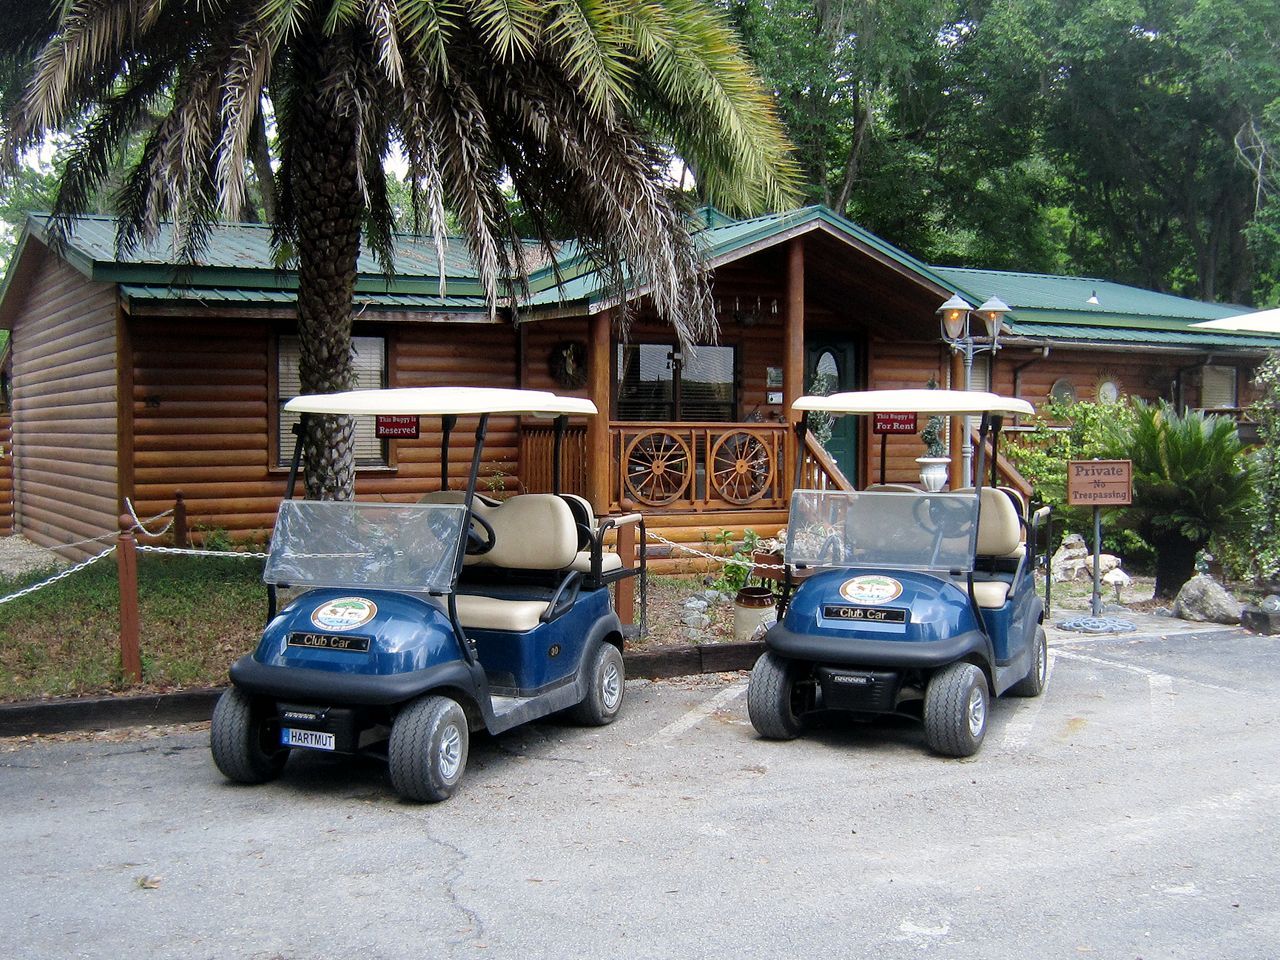 two golf carts are parked in front of a log cabin